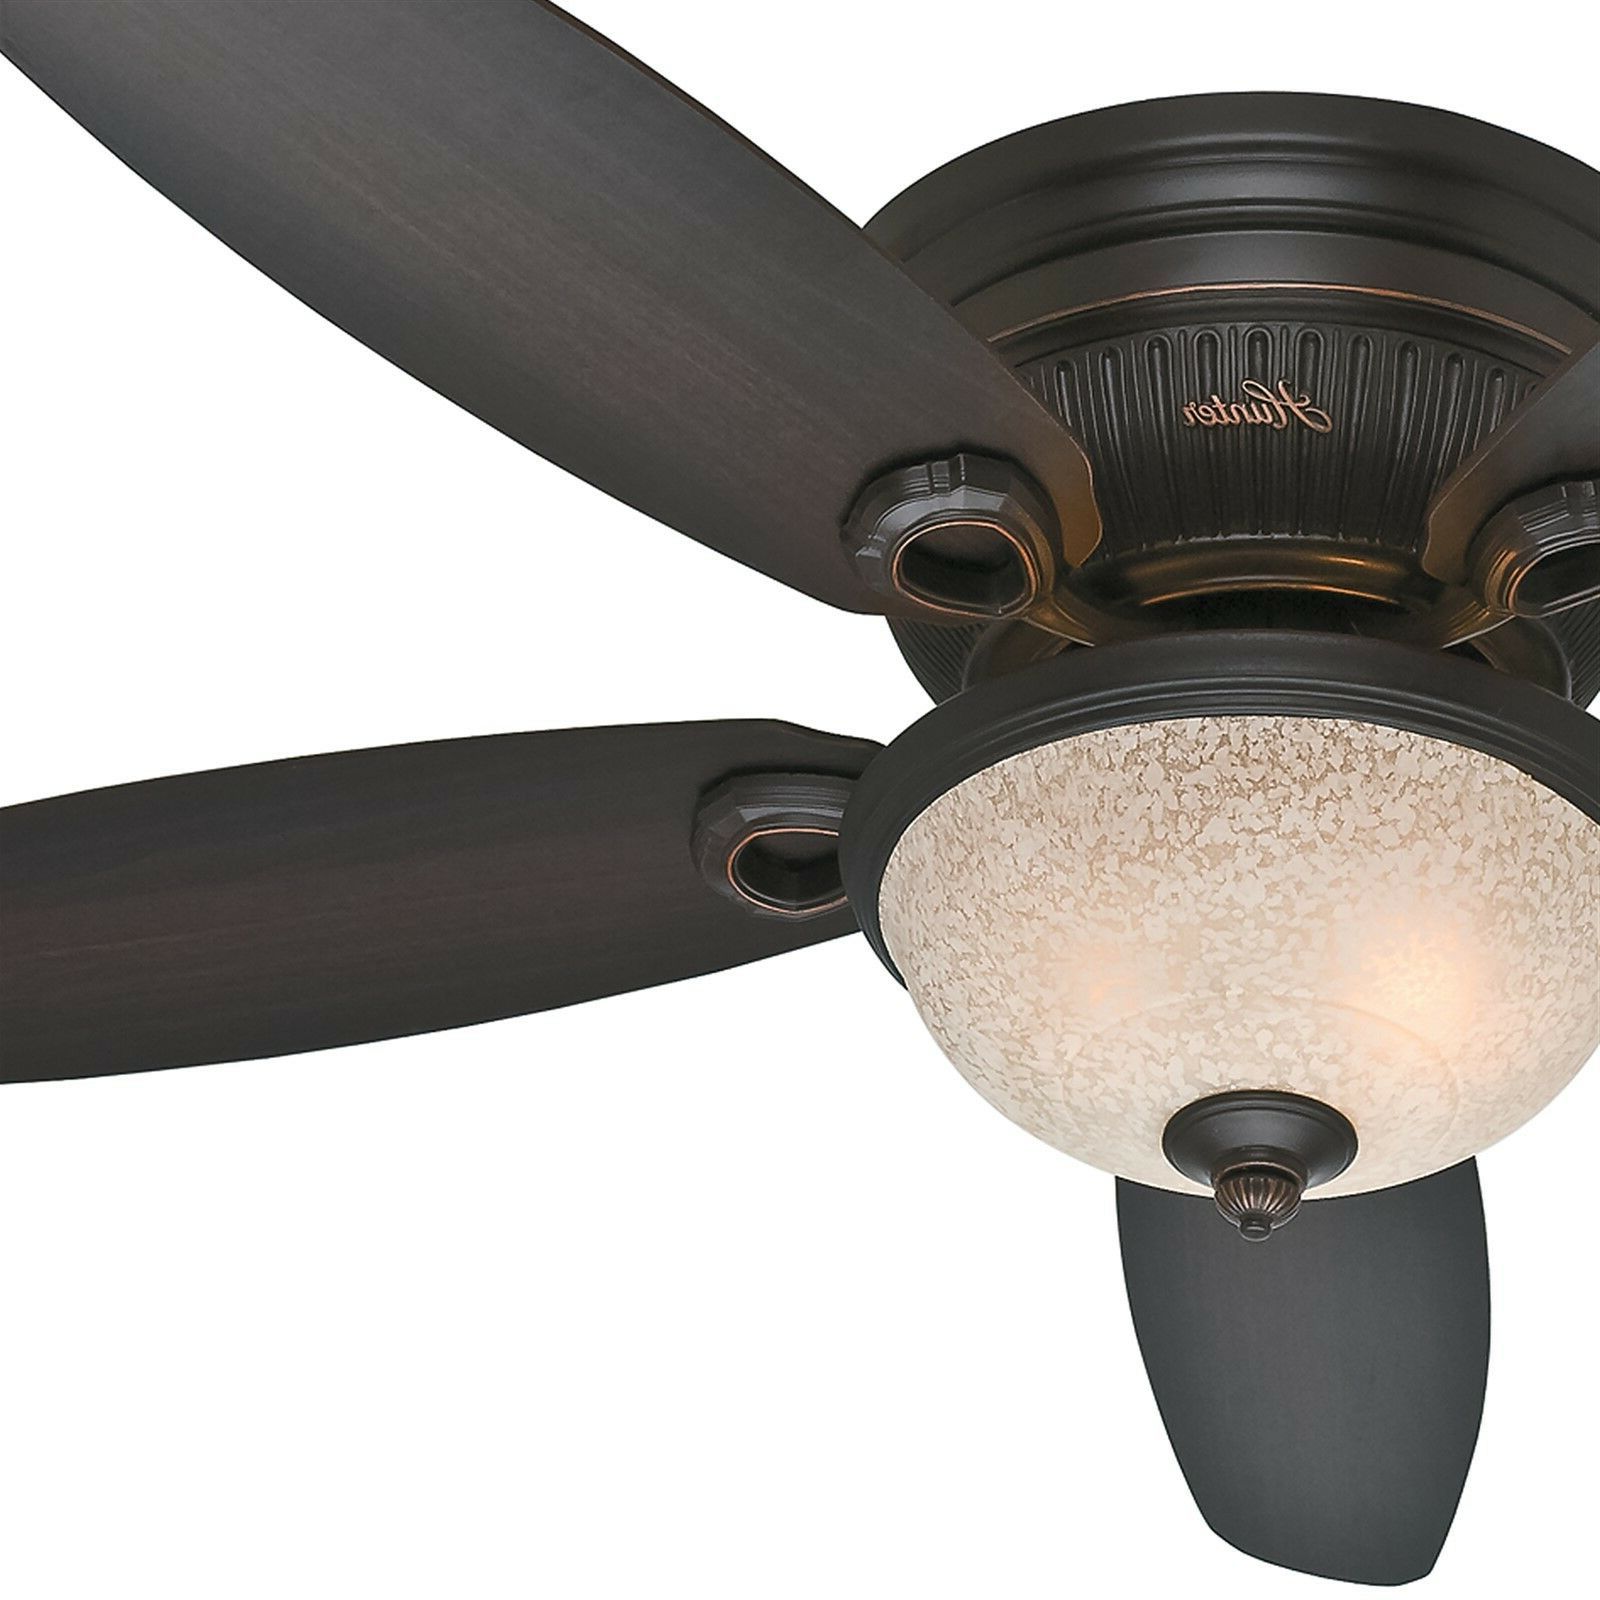 Hunter Low Profile 5 Blade Ceiling Fans Intended For 2020 Details About Hunter 52" Low Profile Ceiling Fan With Bowl Light Kit In  Onyx Bengal, 5 Blade (View 11 of 20)